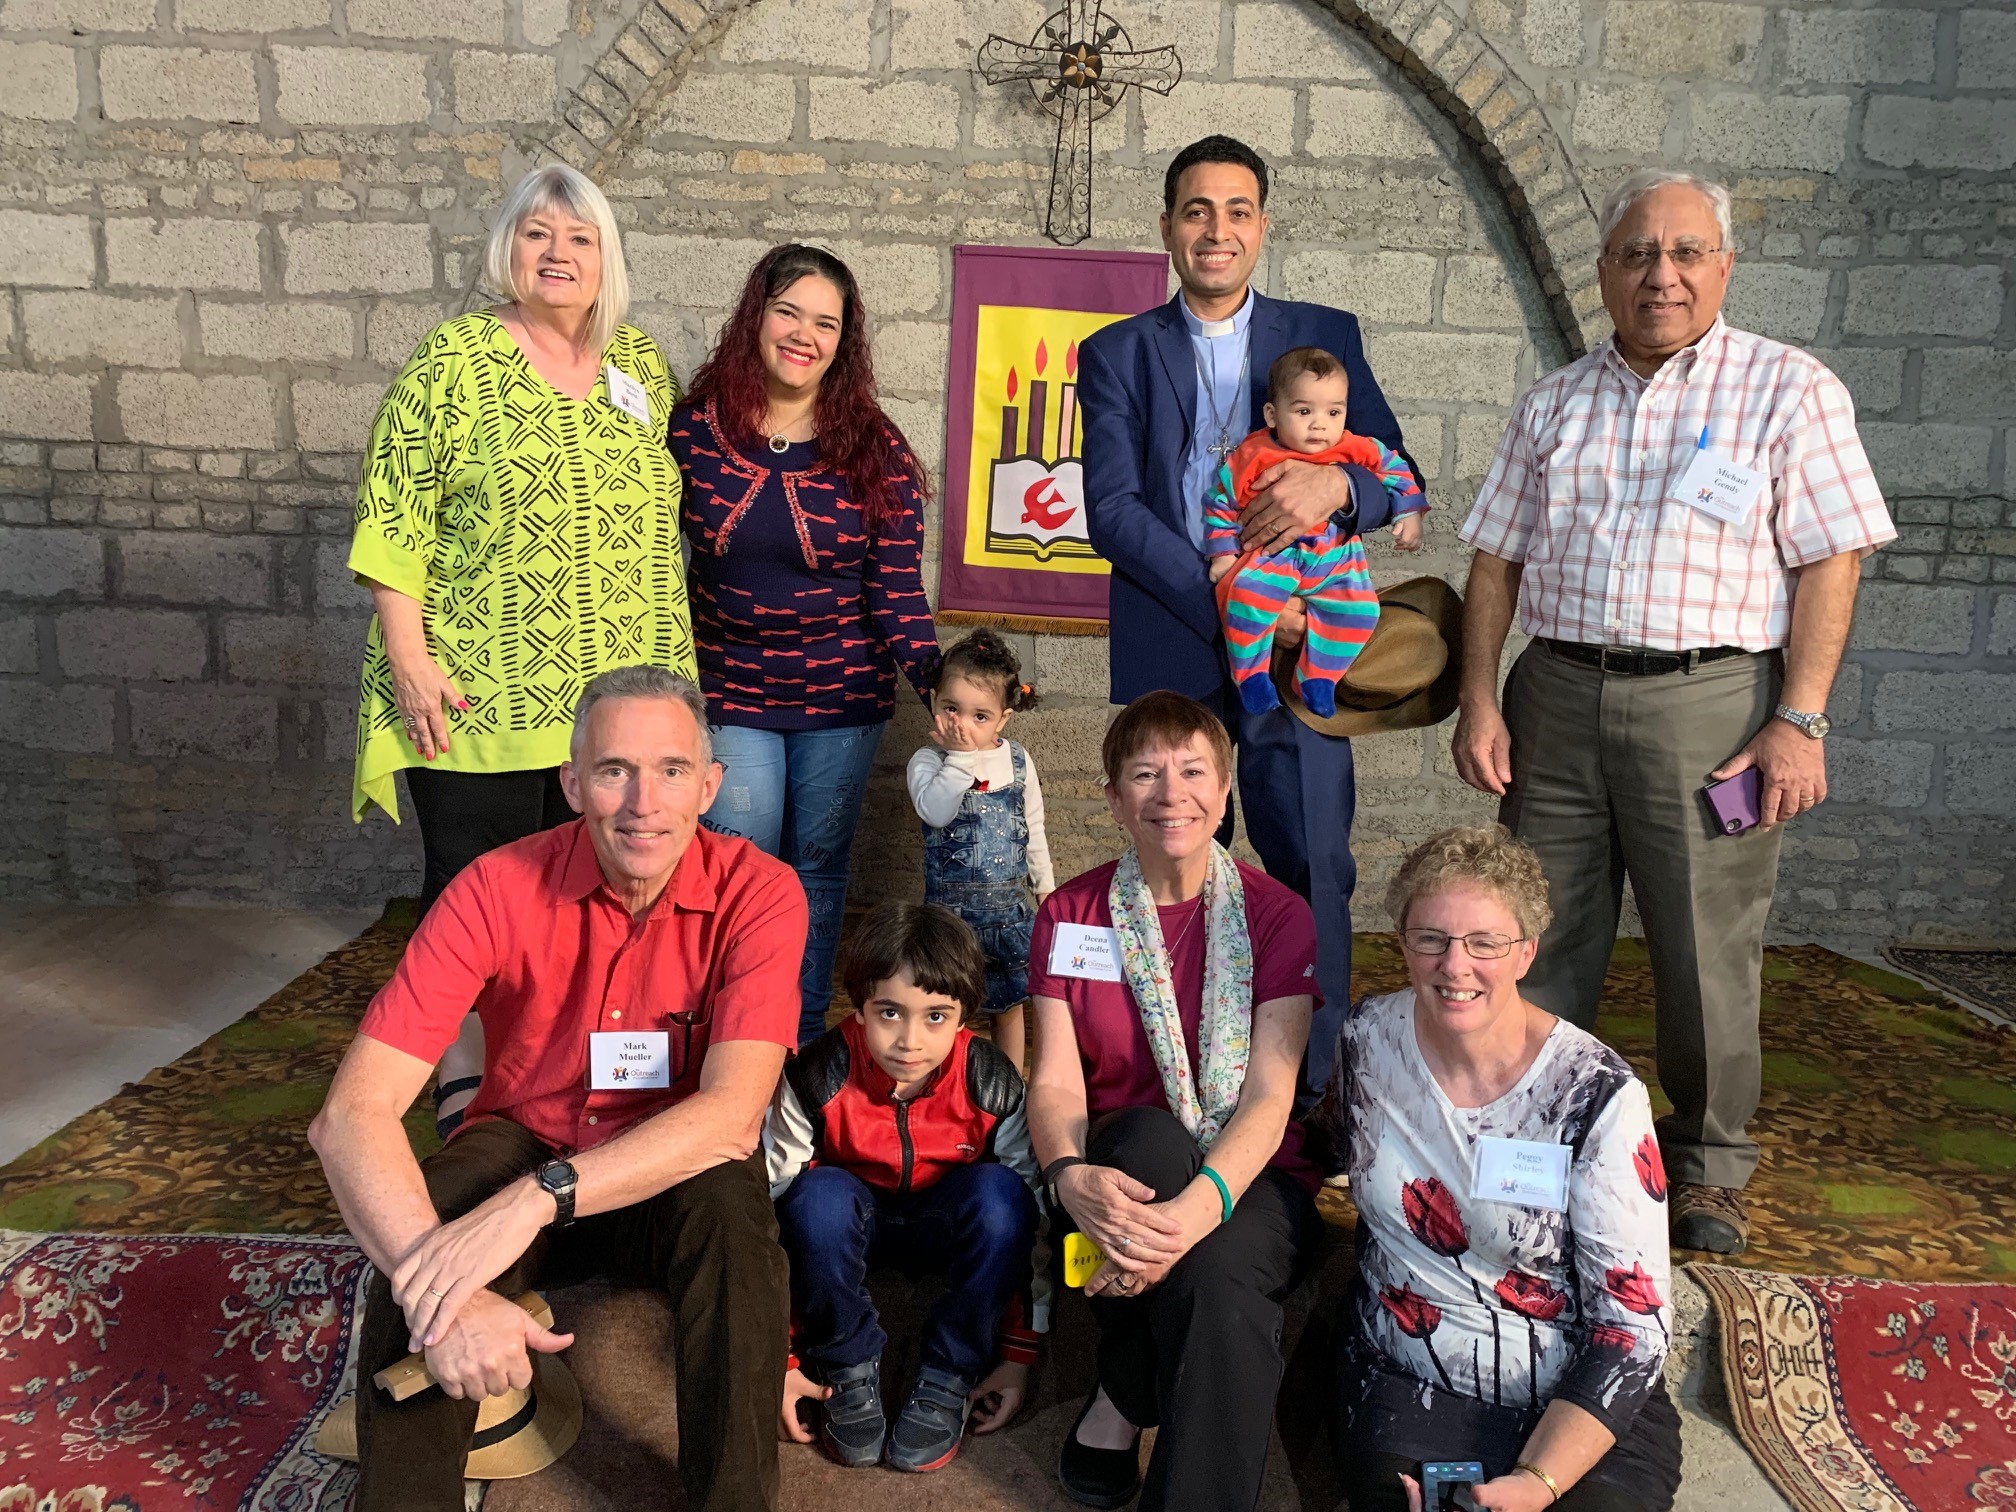  5 members of the Outreach Foundation team (Marilyn Borst, Michael Gendy, Mark Mueller, Deena Candler, Peggy Shirley) made the 90 minute drive, south of Luxor, to Adaima to see Rev Shenouda Girgis and his family (seen here) 